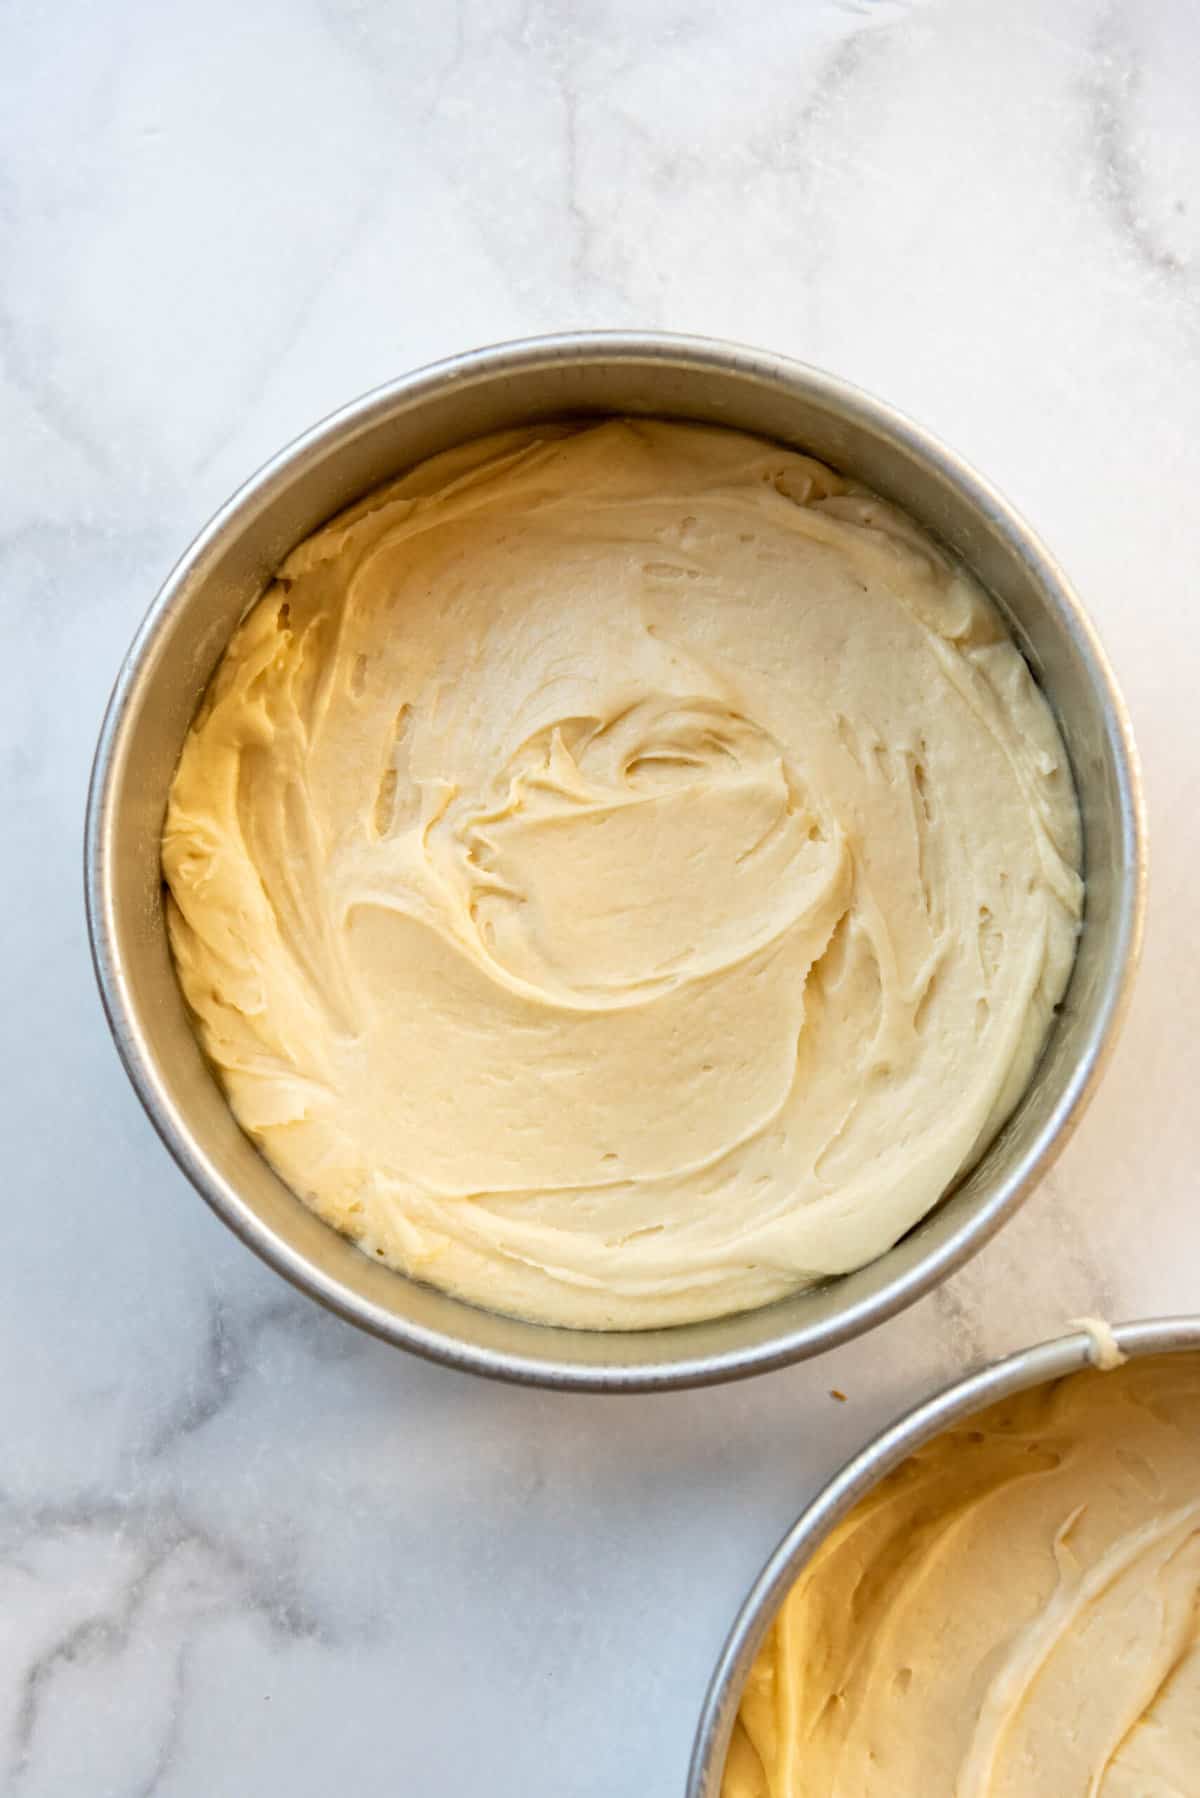 Cake batter spread into a 9-inch cake pan.